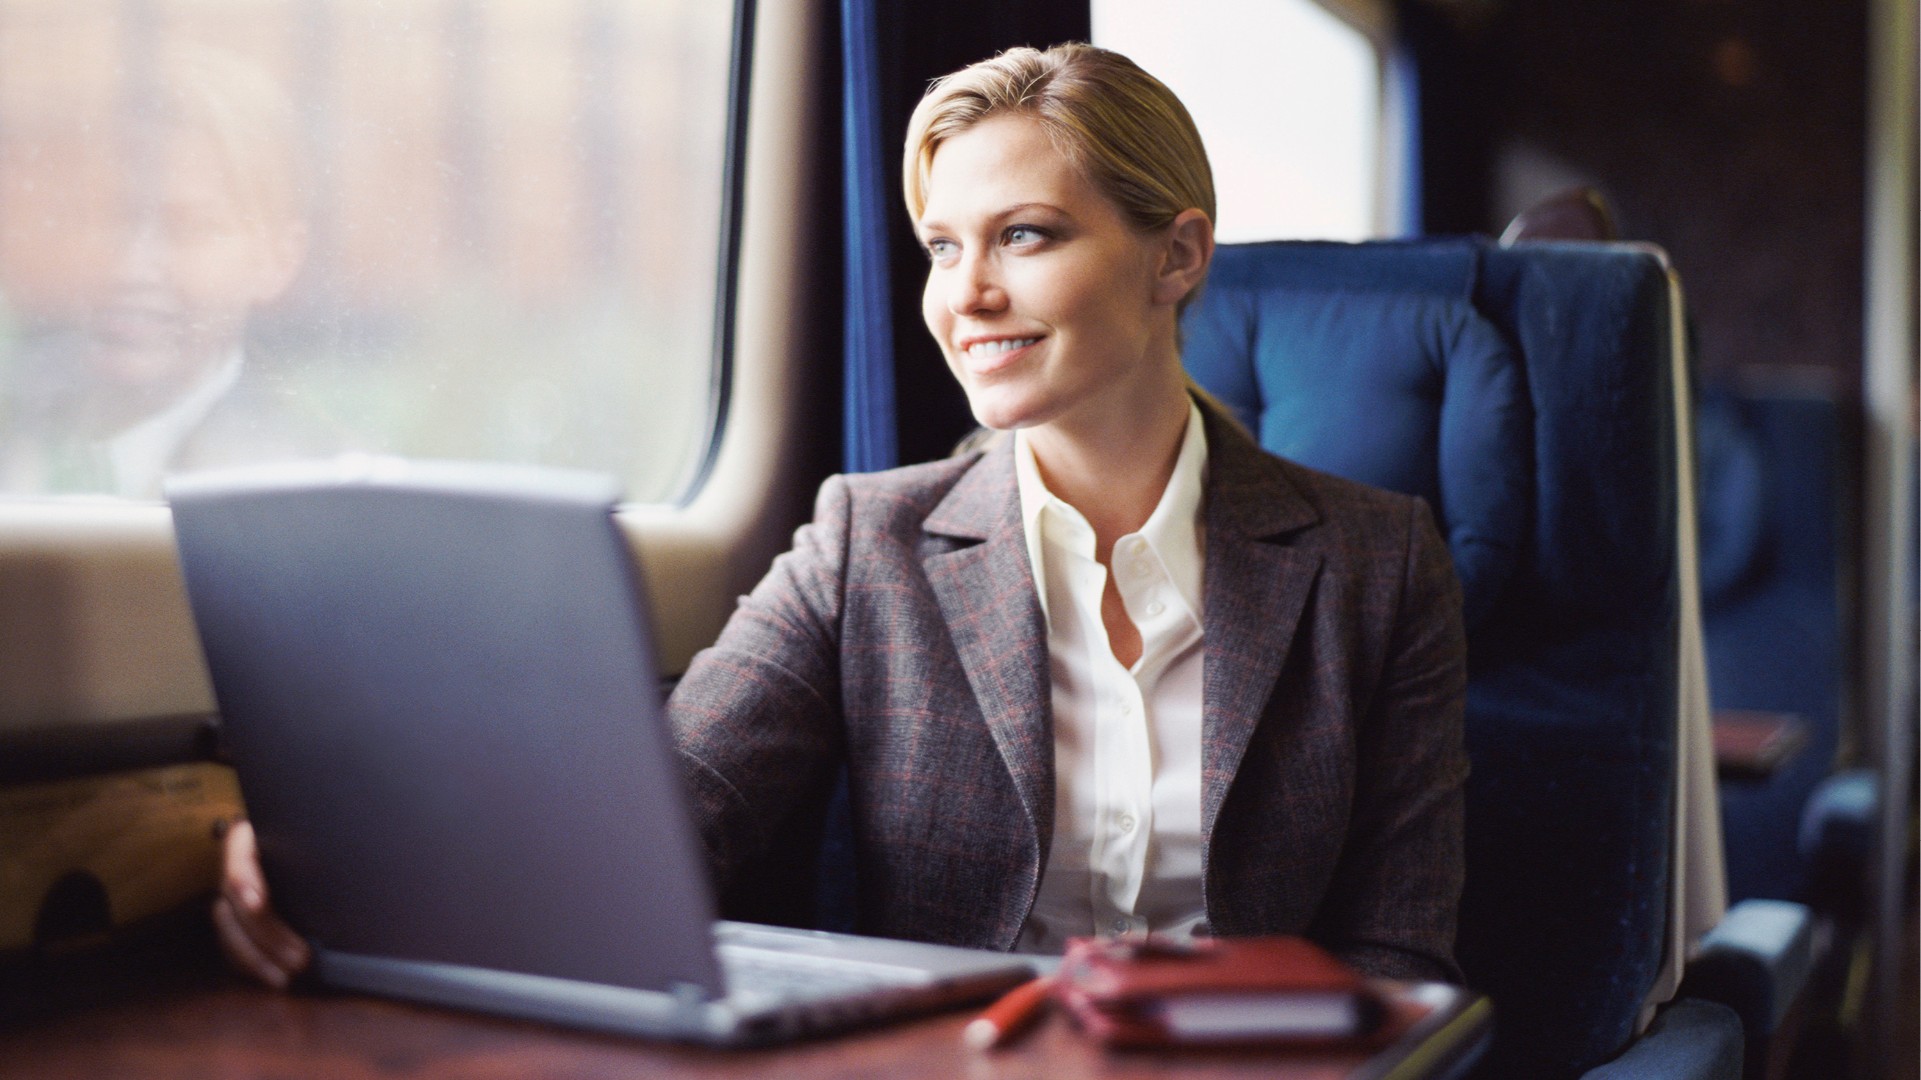 Accessibility: Woman on a laptop on a train